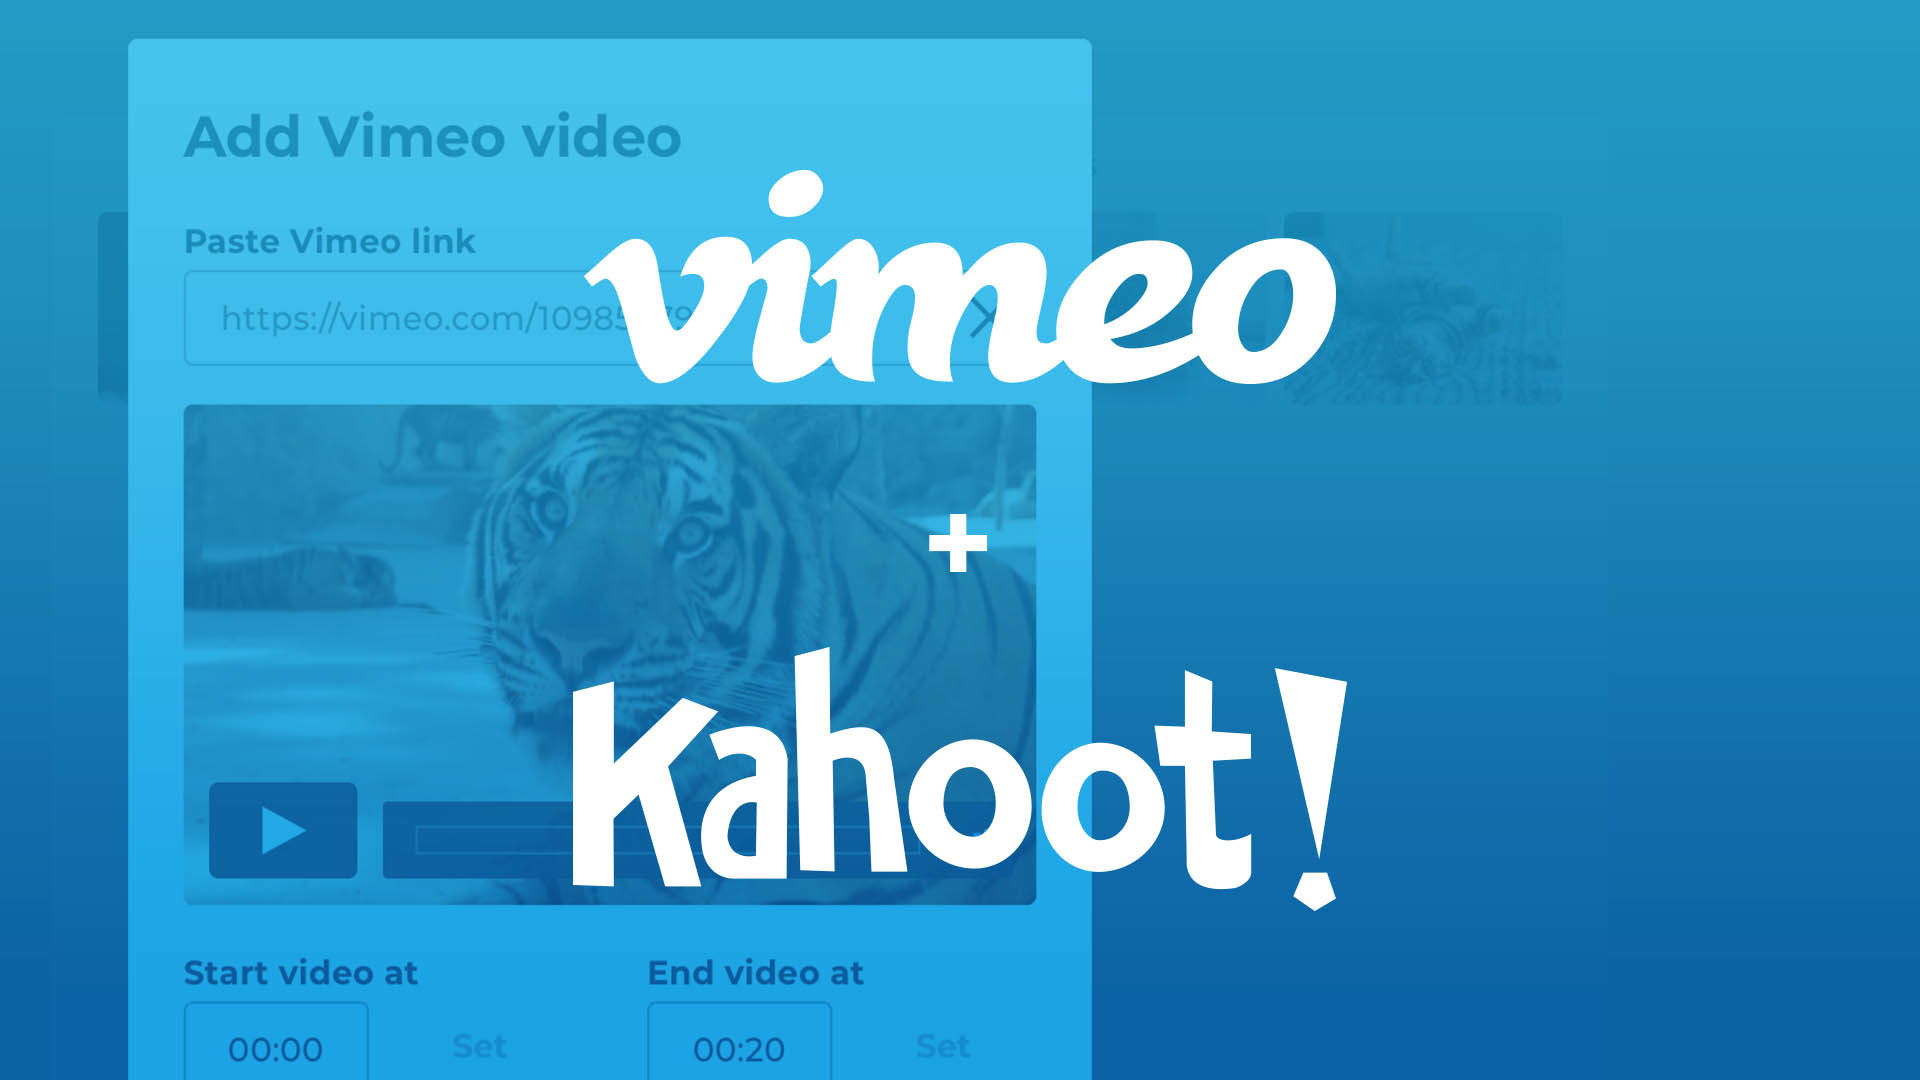 Kahoot! launches Vimeo integration to make learning more awesome!